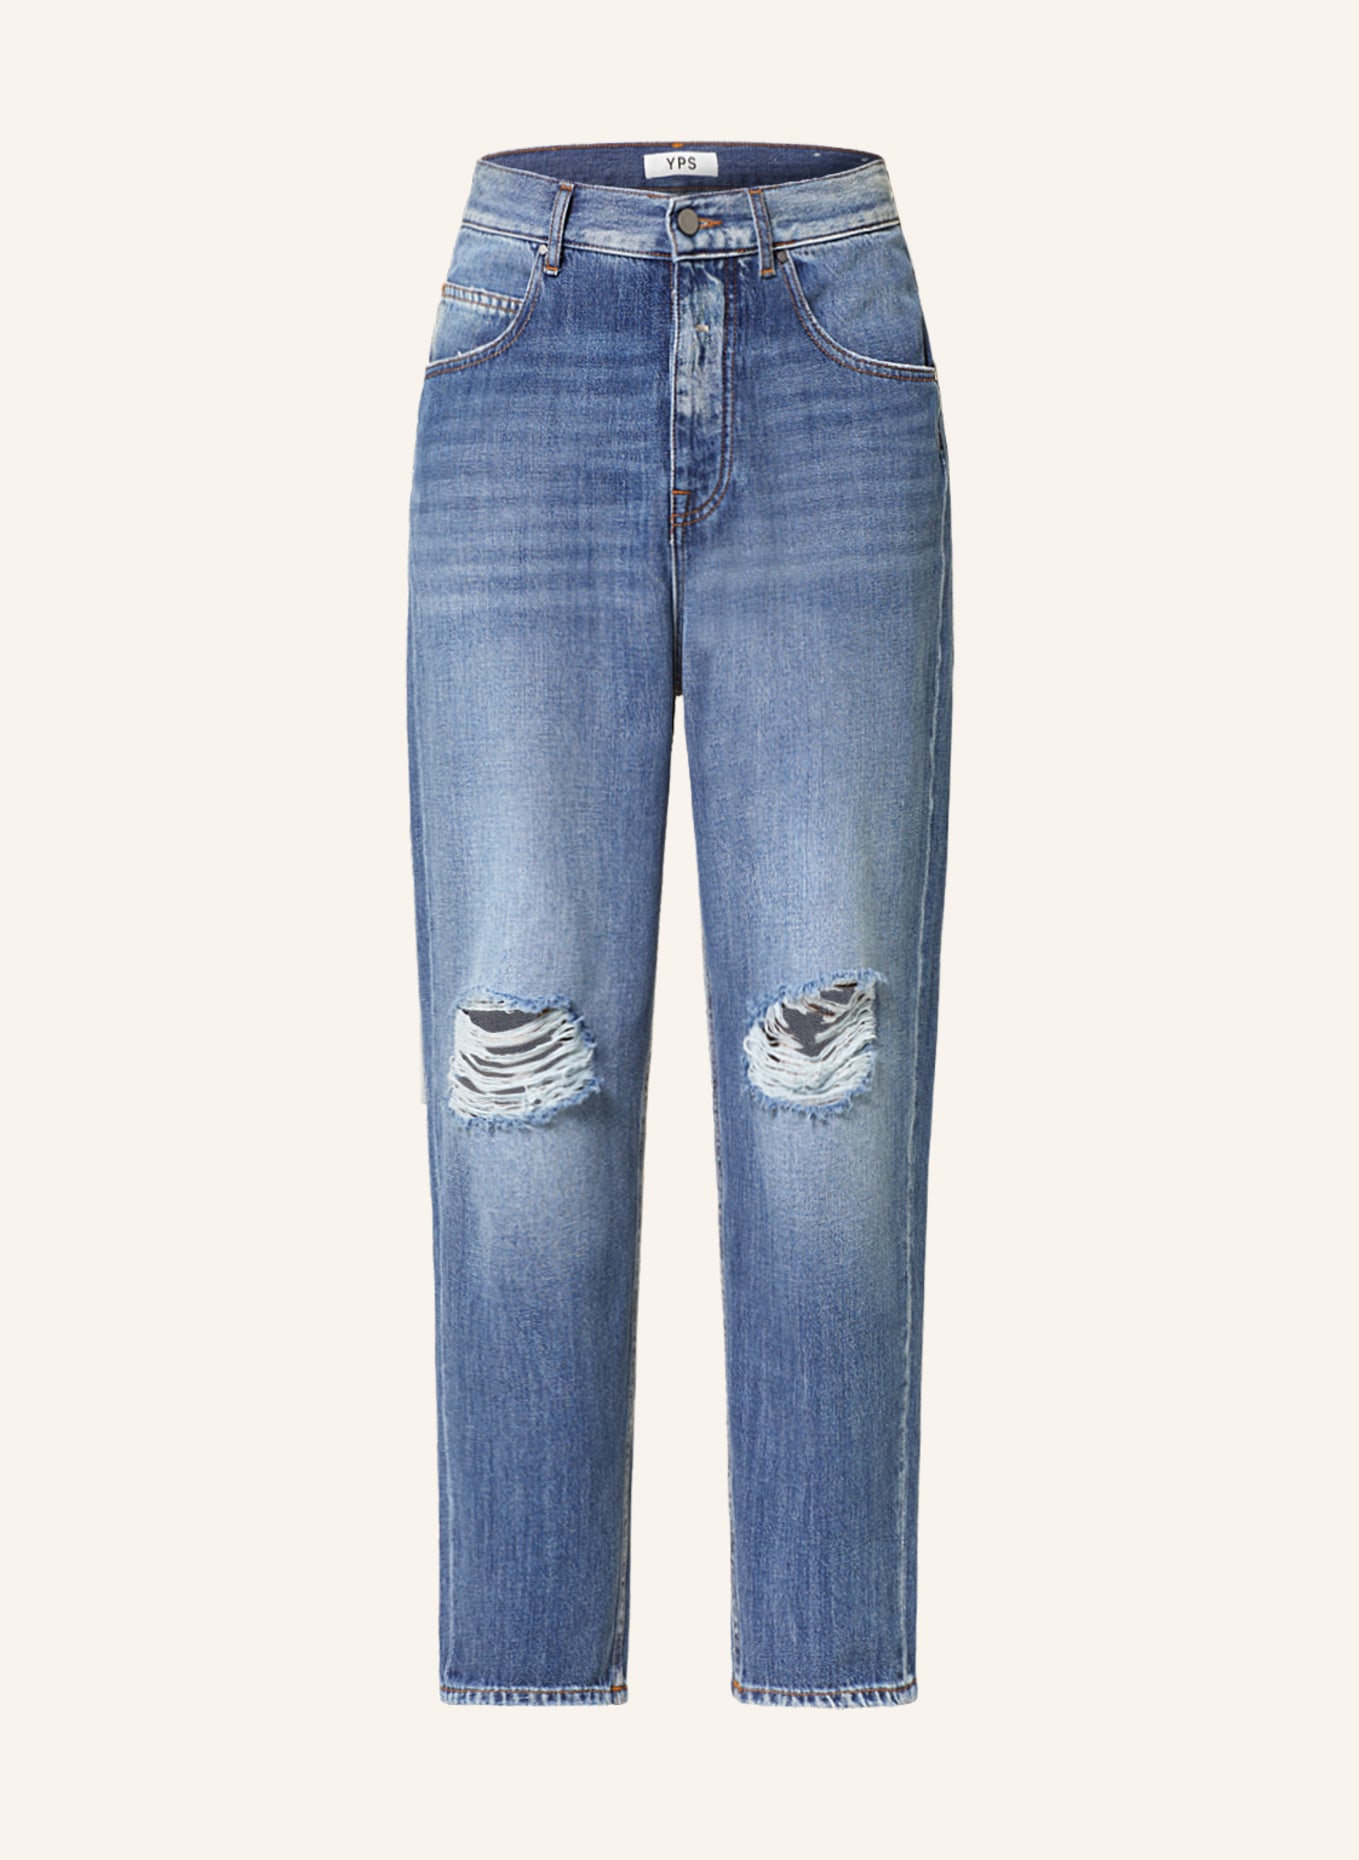 YOUNG POETS Destroyed Jeans TONI Tapered Fit, Farbe: 518 light blue (Bild 1)